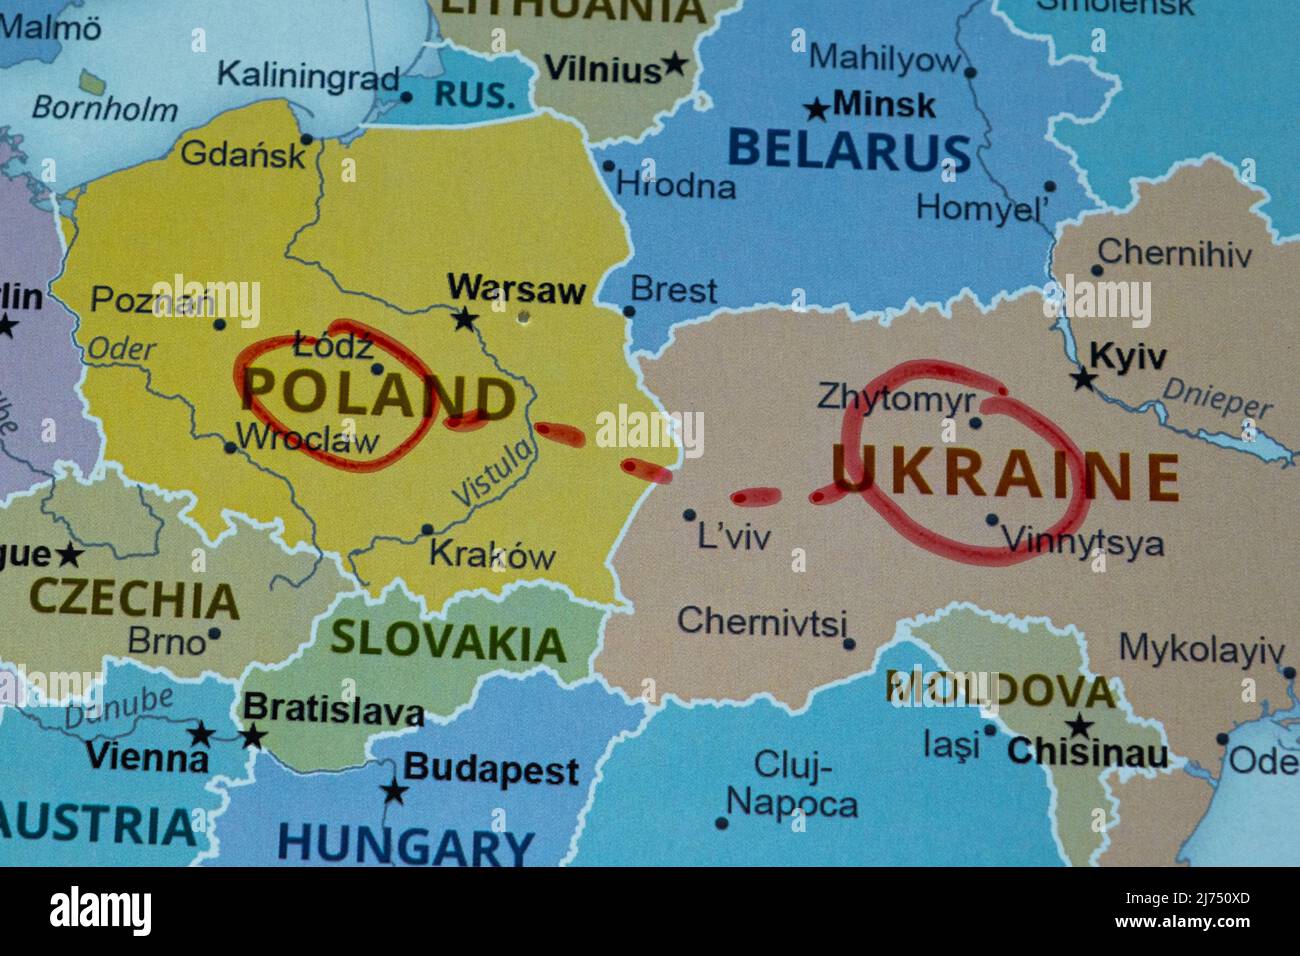 Poland and Ukraine on map marked with a pen, East Europe route on map with red pen, Ukraine war, vacation and road trip concept, Europe destination Stock Photo